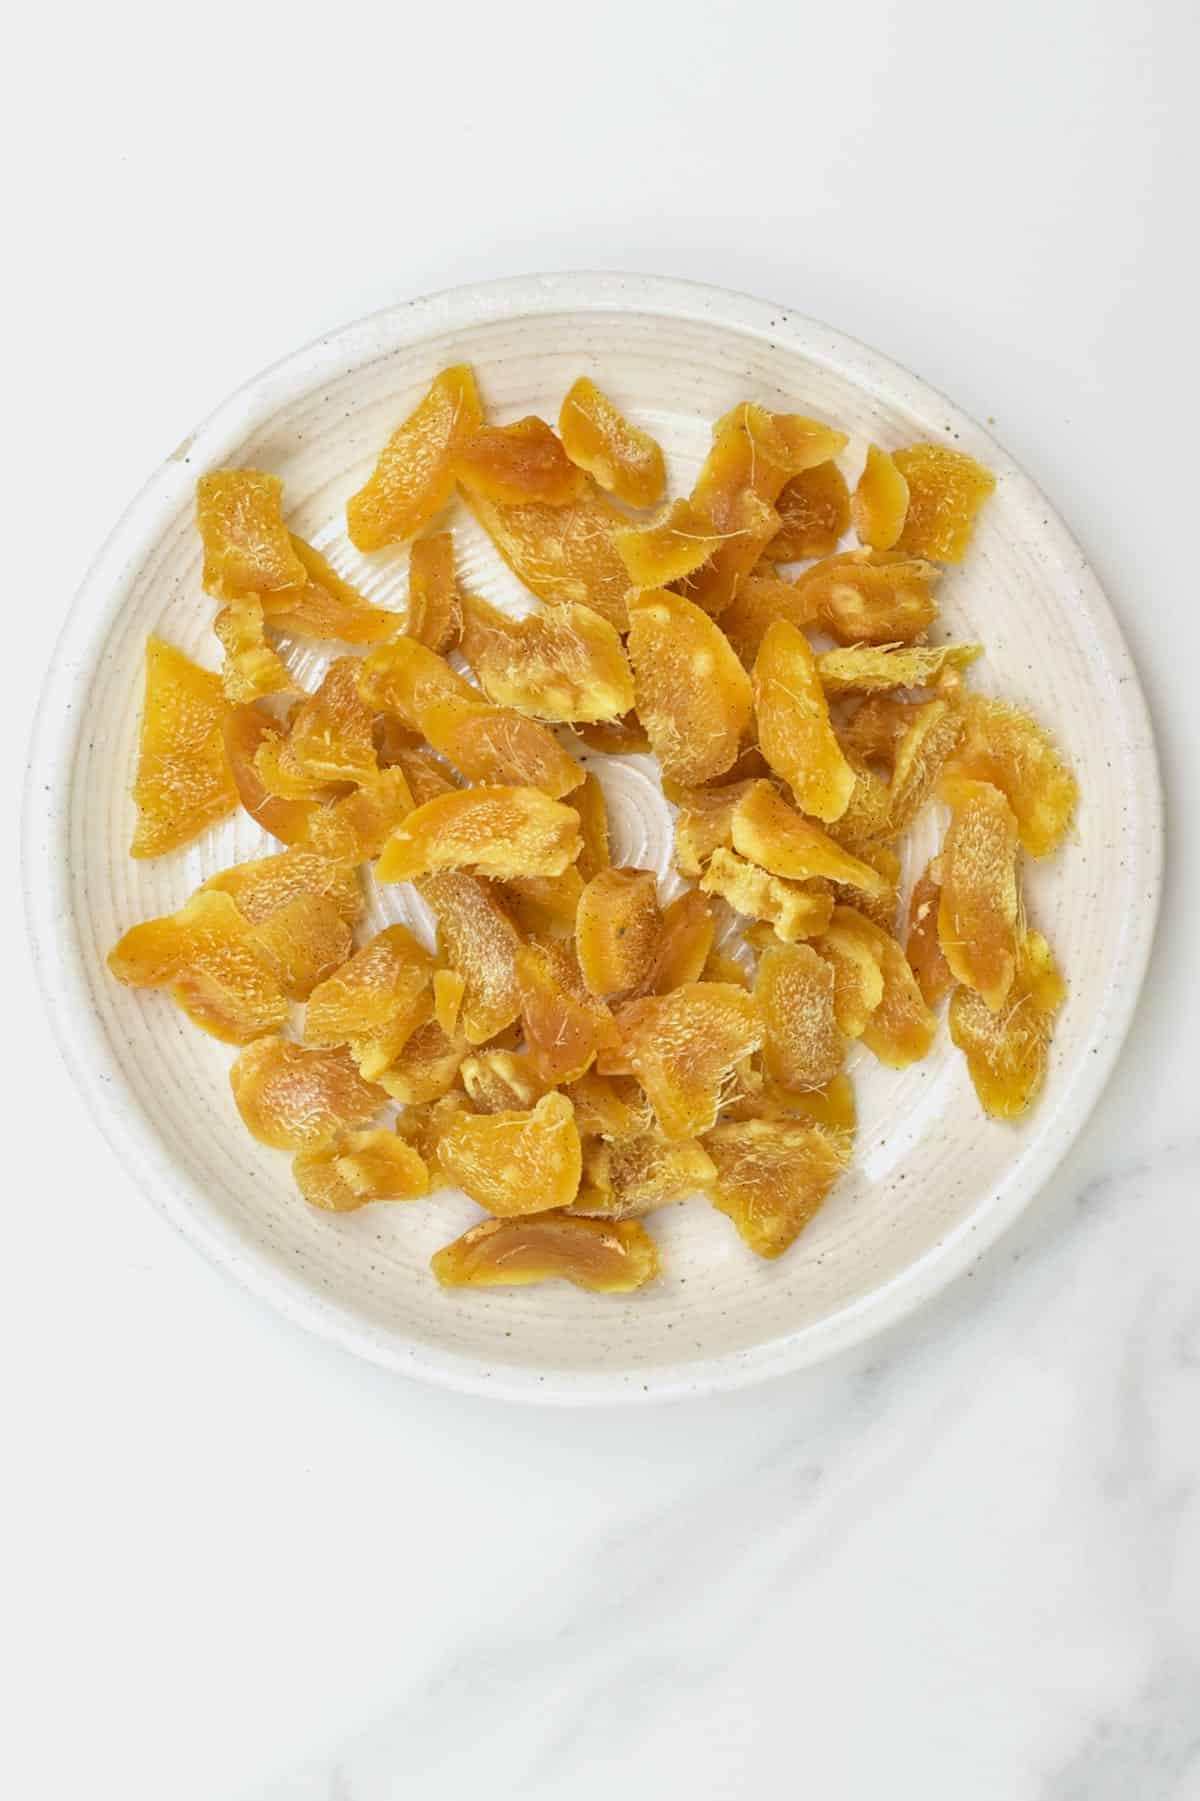 Crystallized ginger in a plate